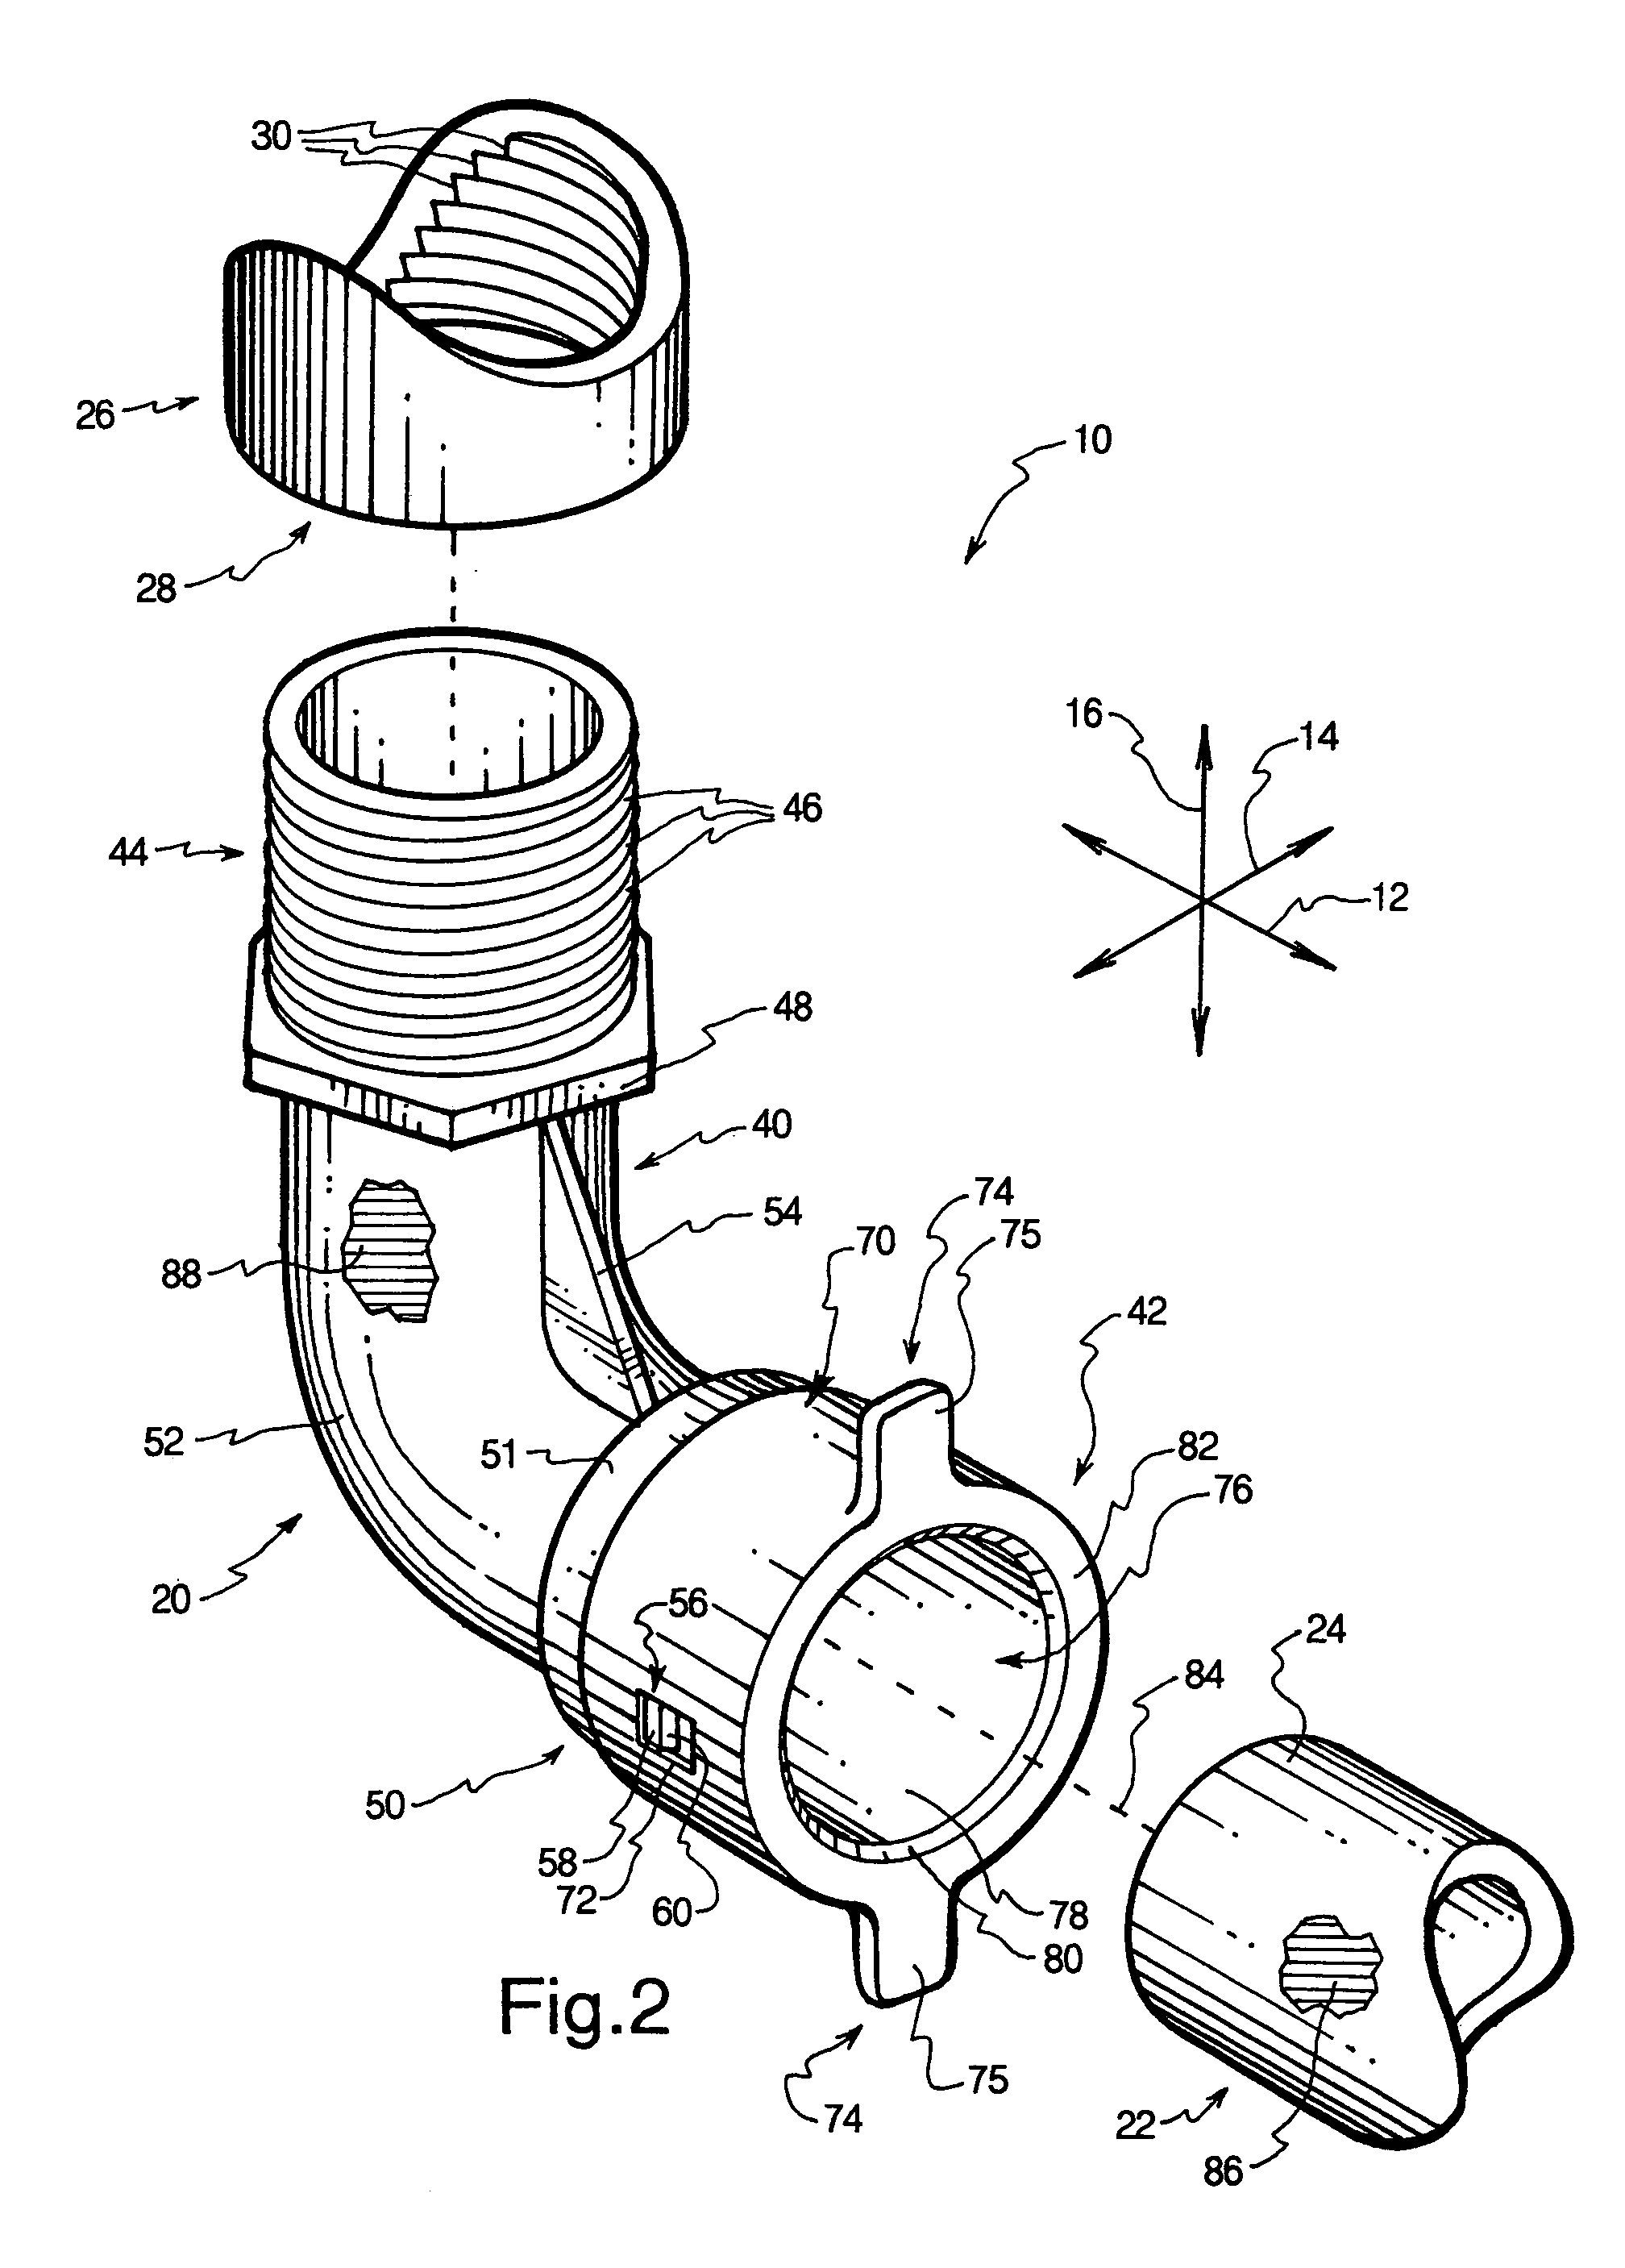 Irrigation coupling apparatus and method